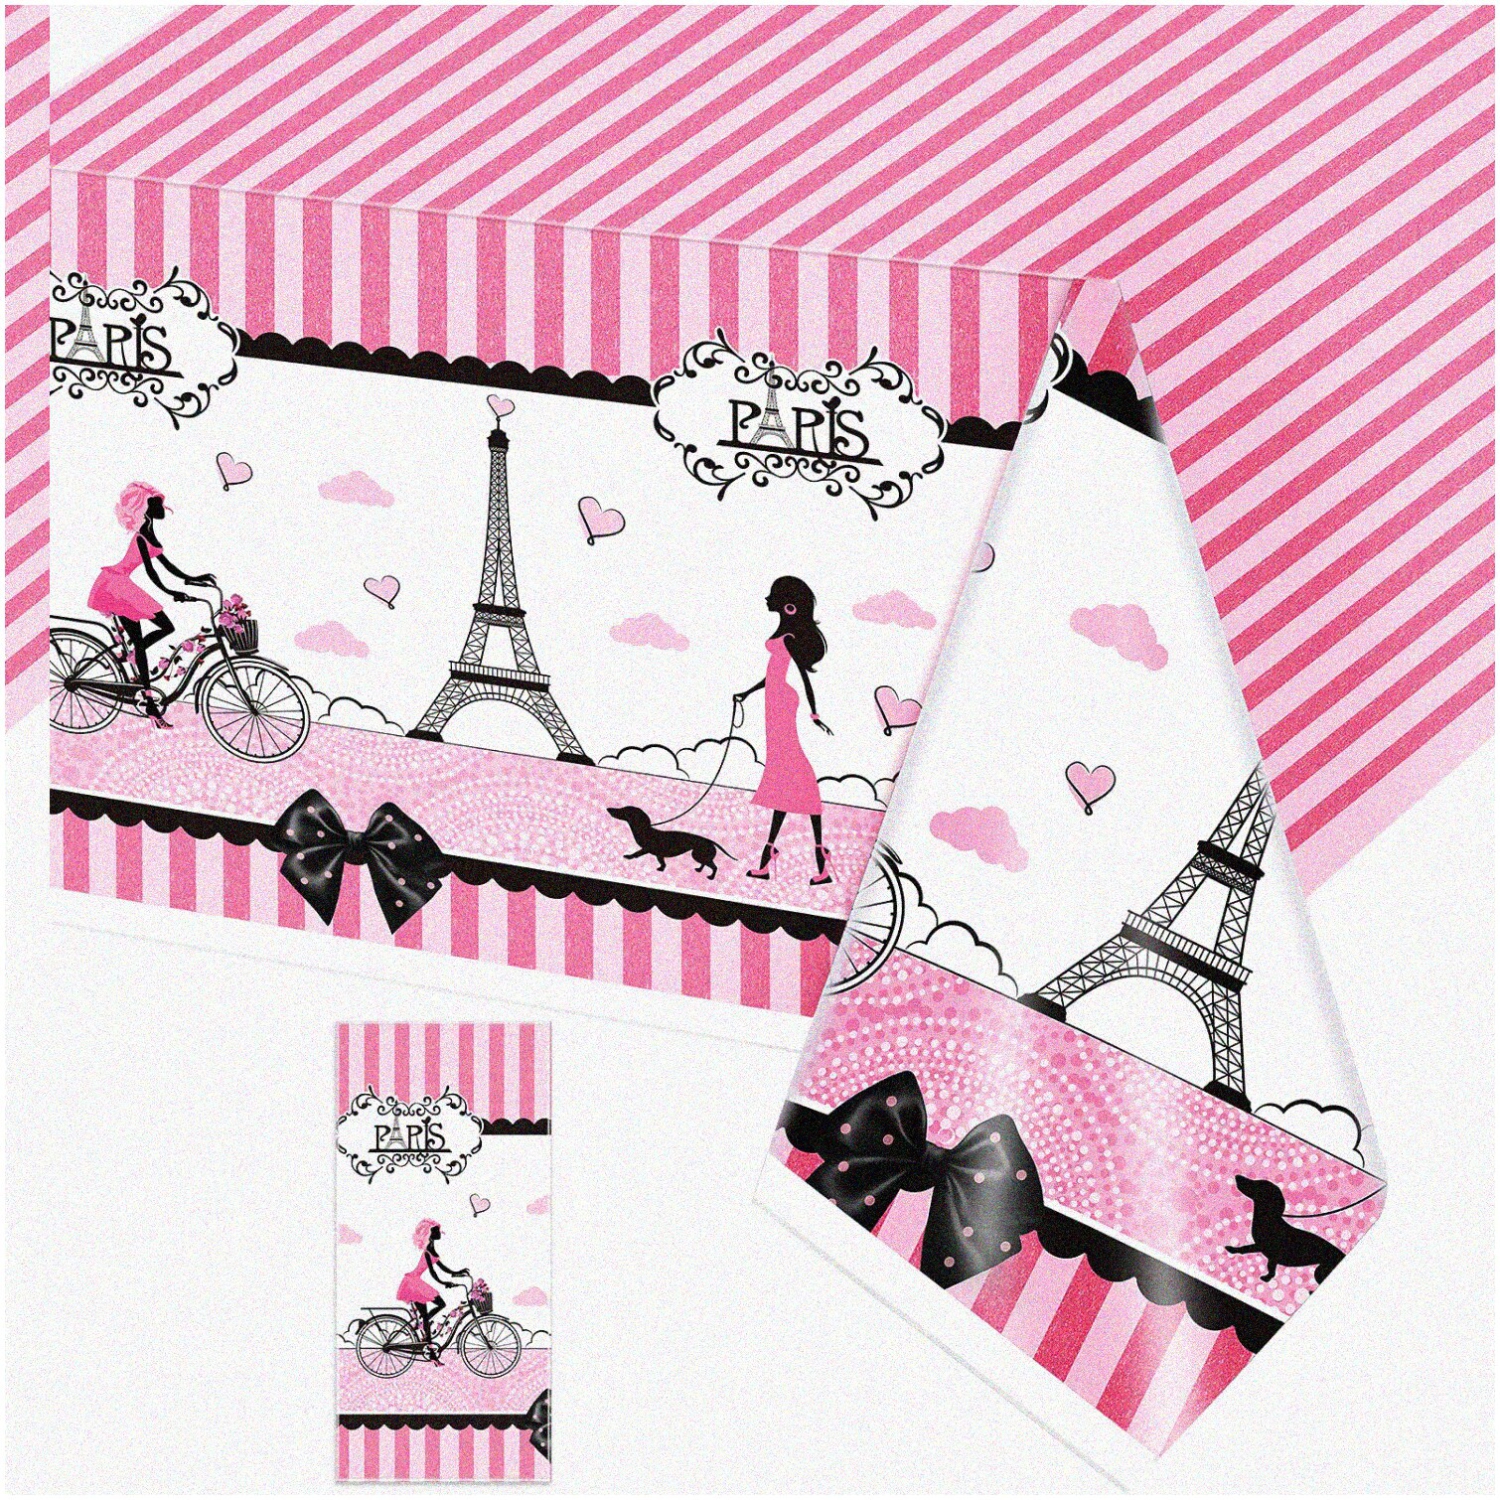 Parisian Princess Party Tablecloth - Ooh La La Pink Plastic Table Cover for Girls Birthday, Baby Shower & Day in Paris Theme Decorations.